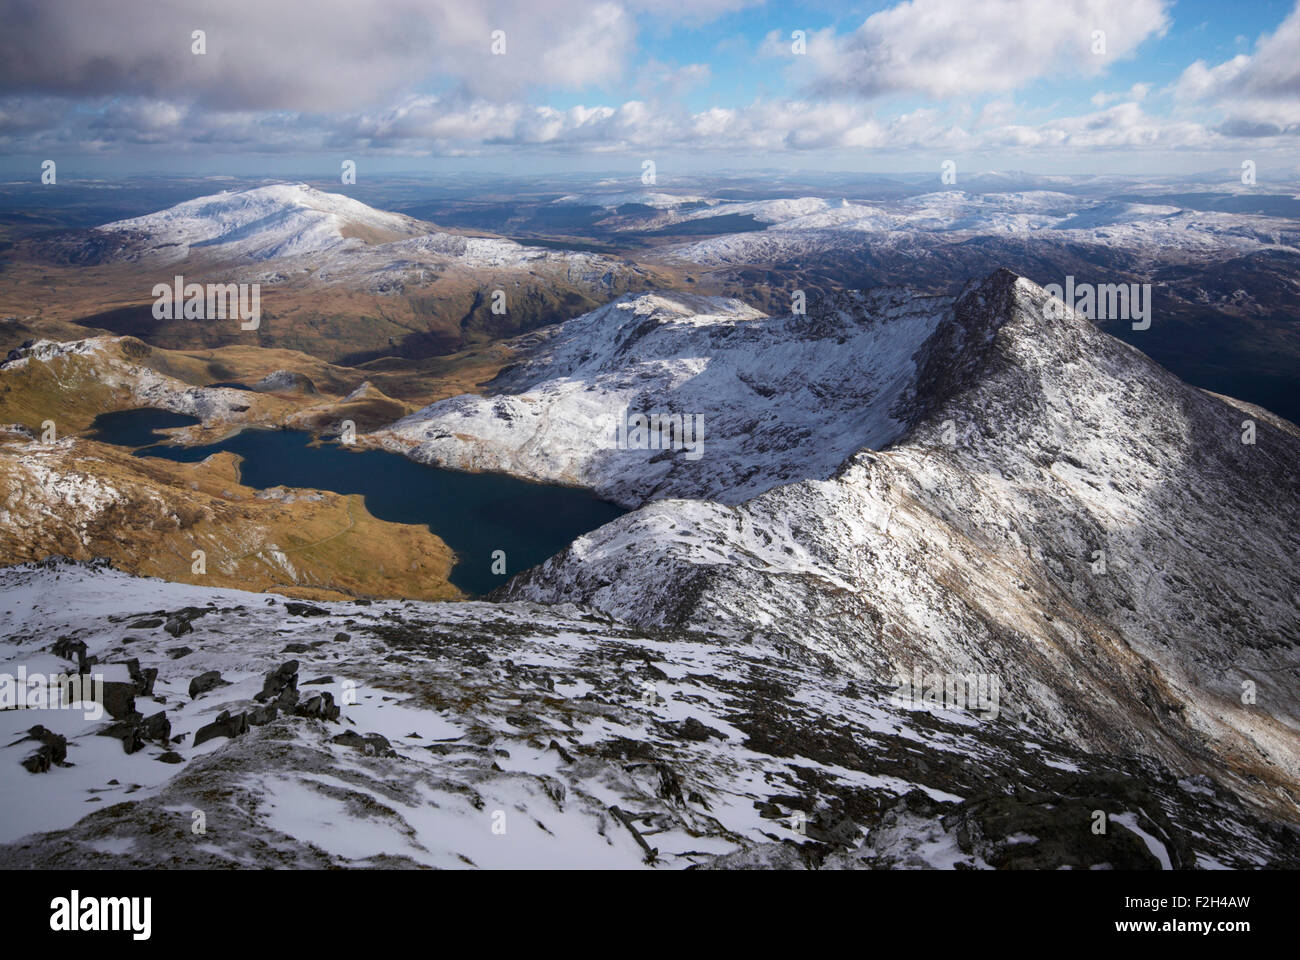 View from the snow covered summit of Snowdon in Snowdonia National Park, Wales, UK Stock Photo